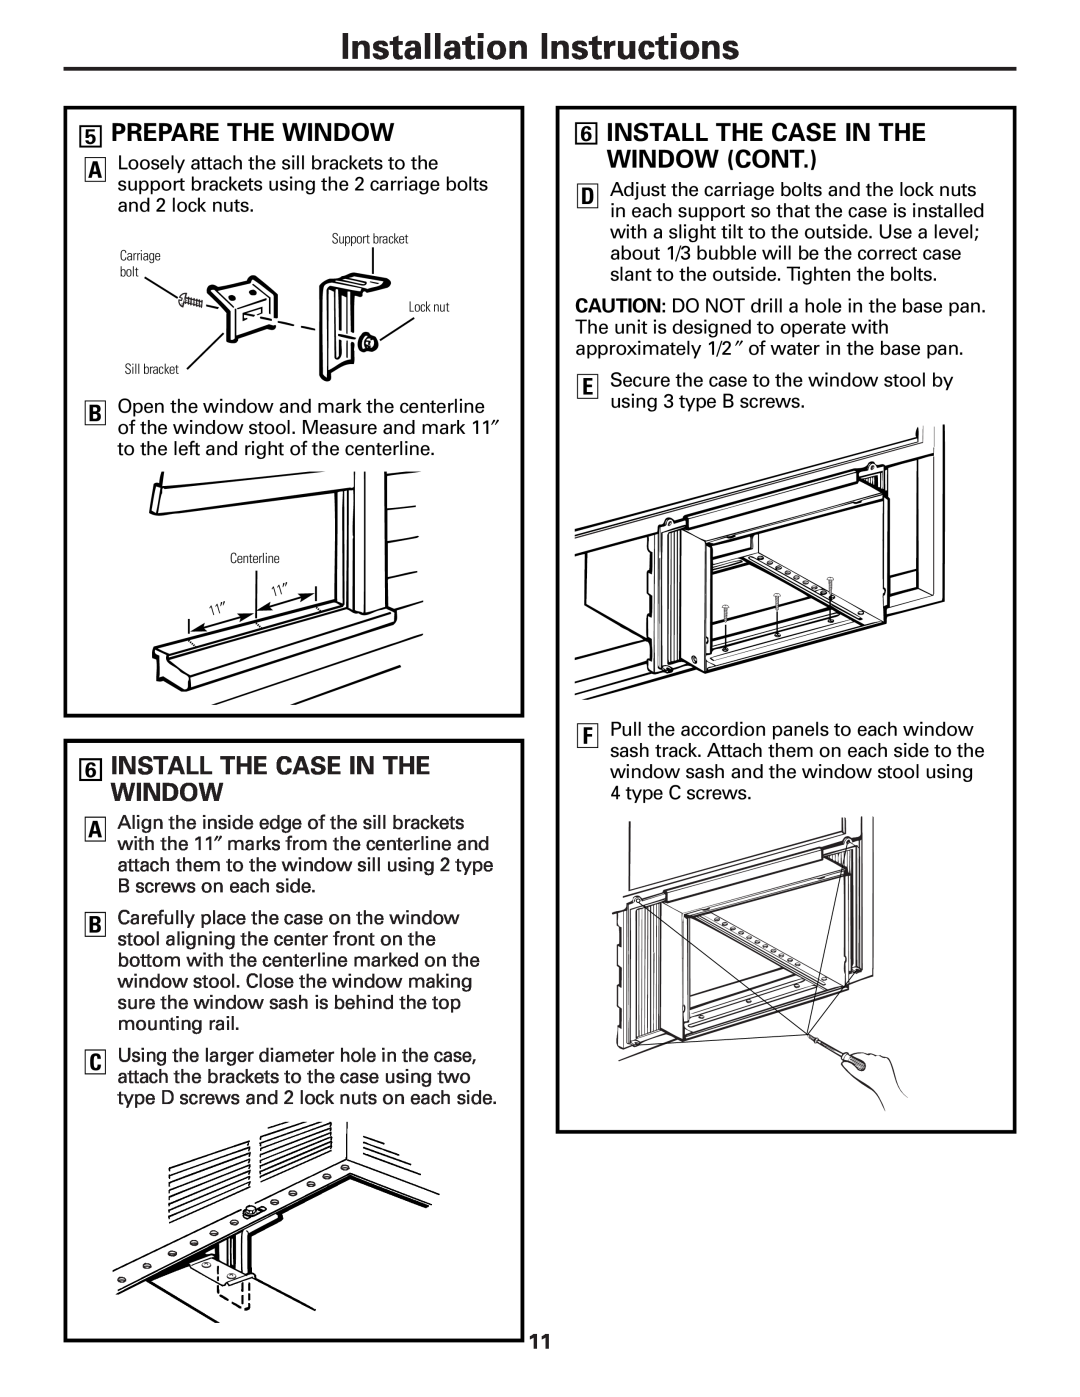 GE AGM24 operating instructions 5PREPARE THE WINDOW, 6INSTALL THE CASE IN THE WINDOW CONT, Installation Instructions 